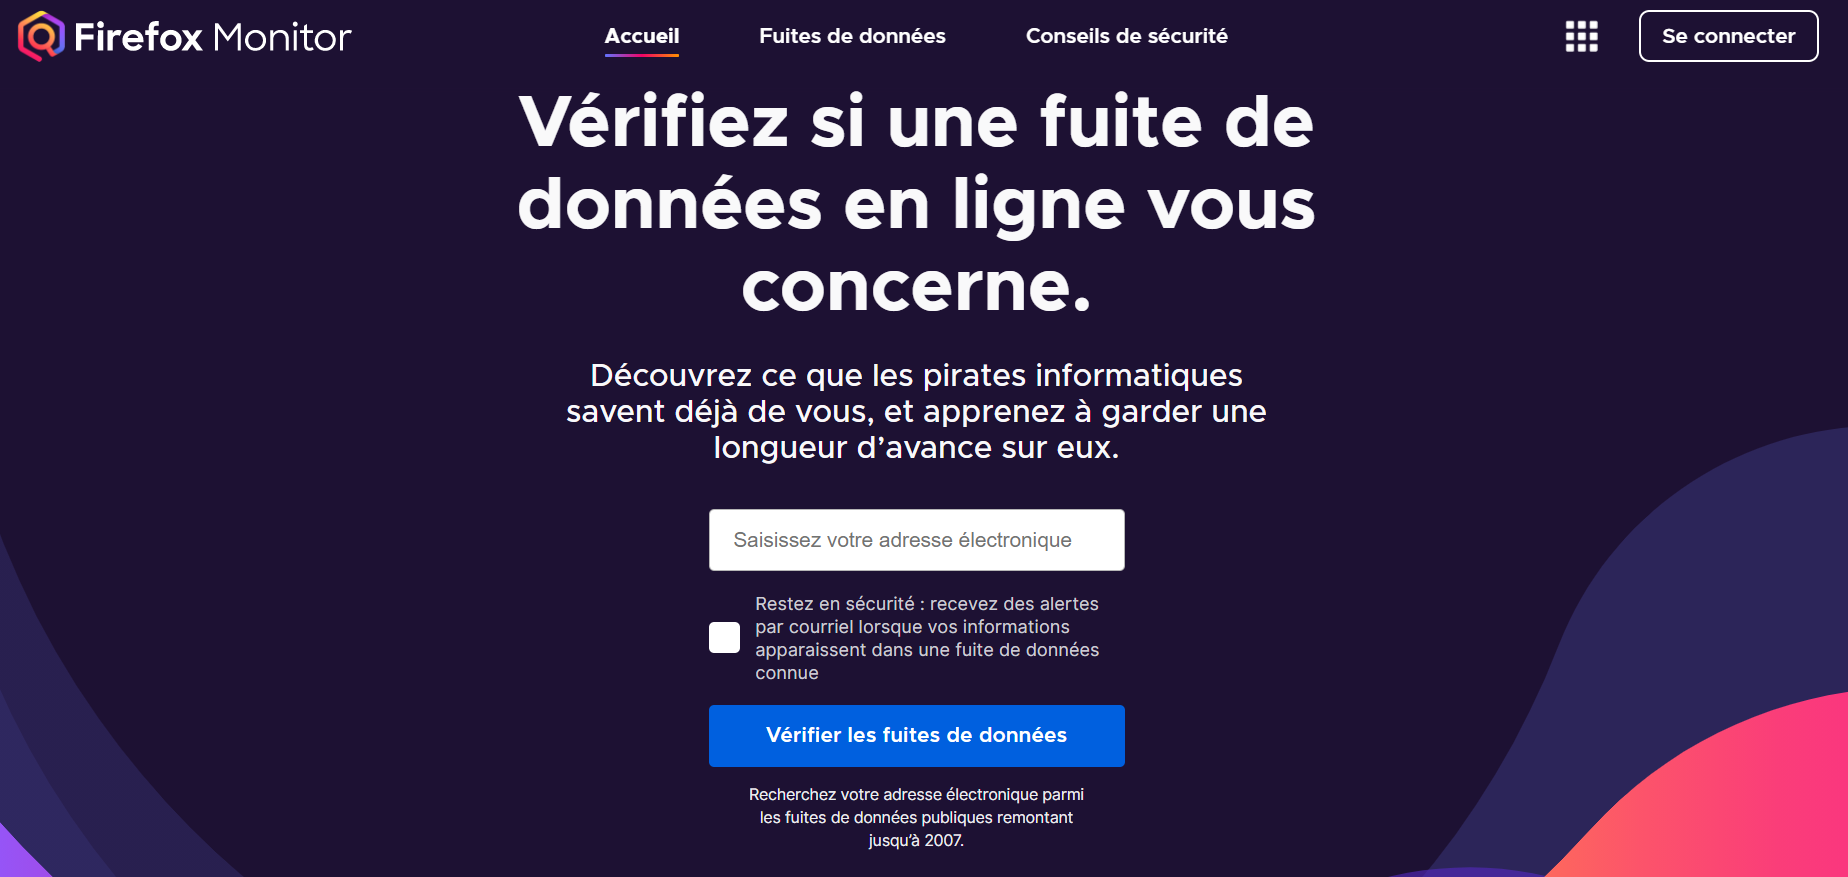 Page d'accueil du site Firefox Monitor